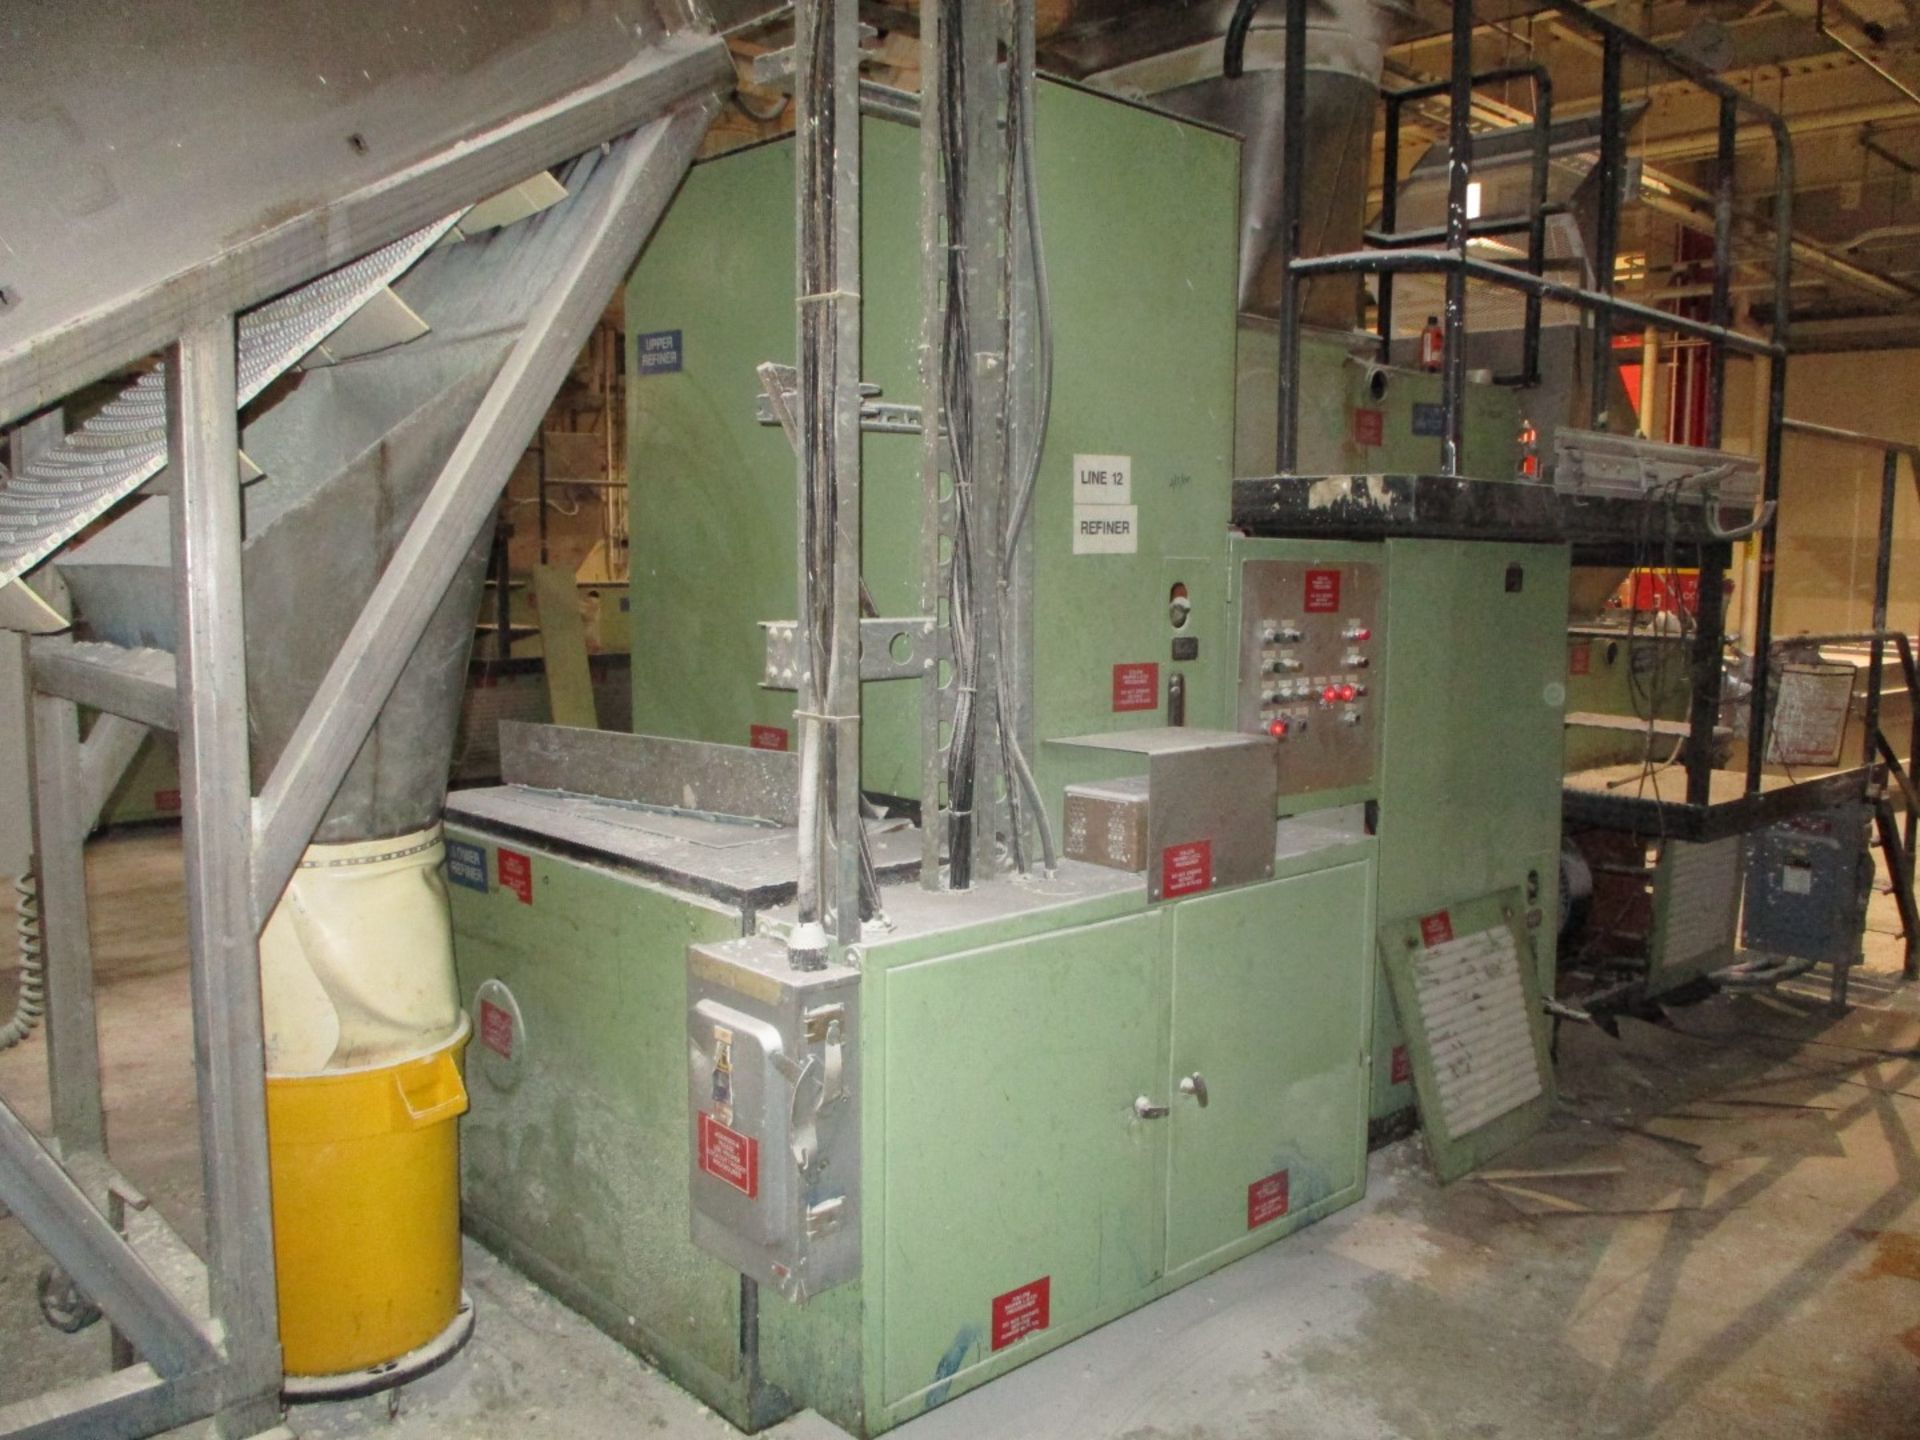 Mazzoni Refiner, Model Duplex M-350, Two Stage Single Screws, Individually Driven W | Rig Fee $16000 - Image 8 of 8